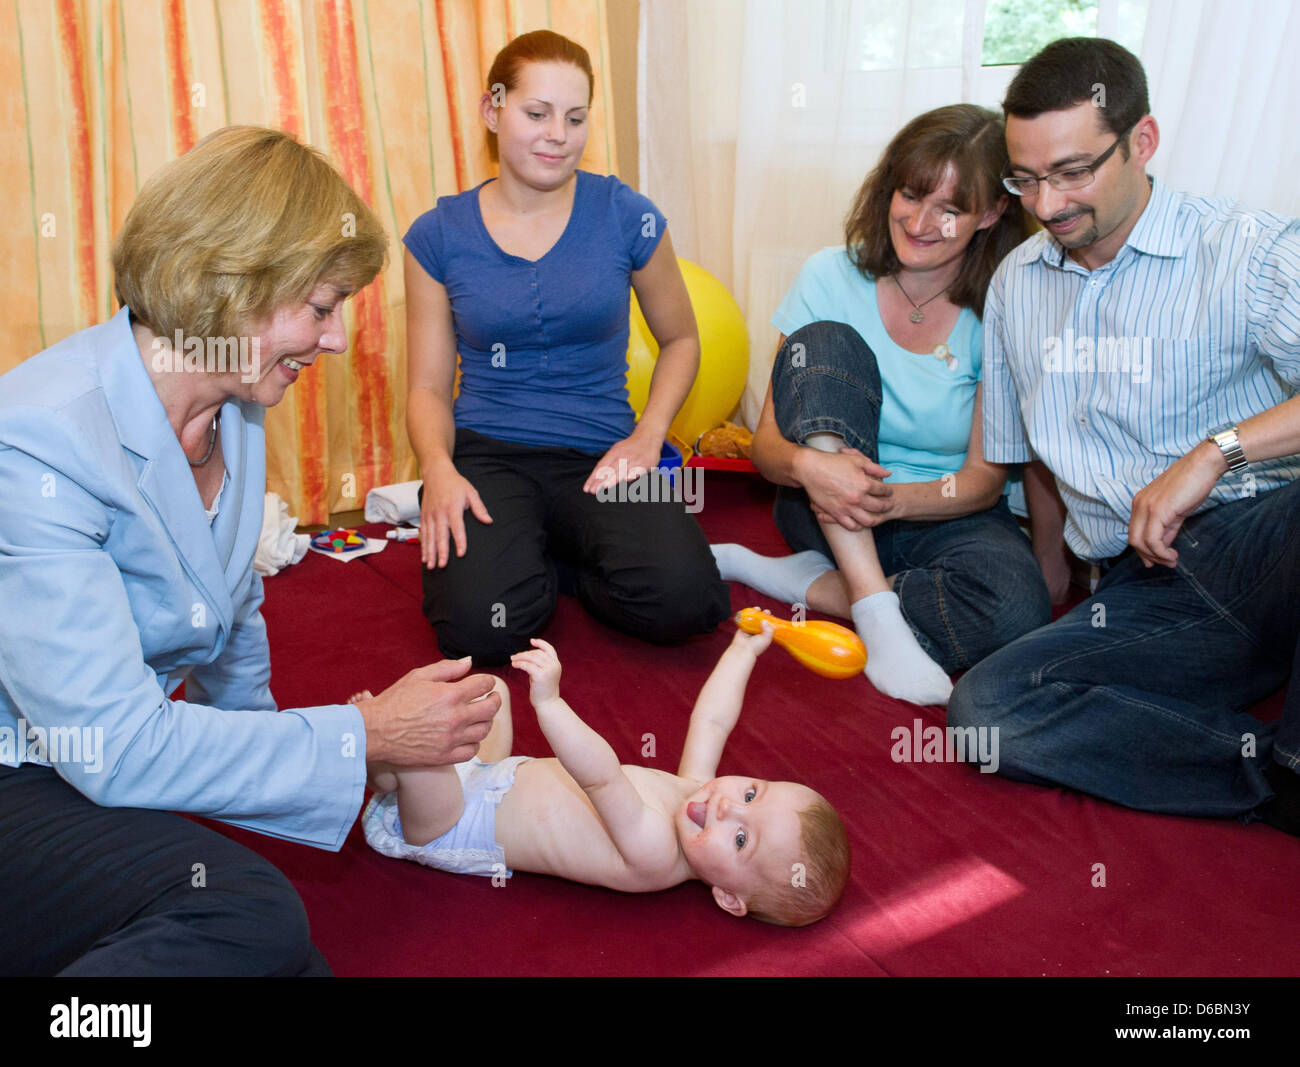 Partner of the German President, Daniela Schadt (L), plays with nine-month-old Lara Hohmann while the parents Sieglinde Hohmann and Marco Heinemann as weel as physiotherapist Svenja Dudek (2-L) are watching them at the after-care hospital for children Berlin-Brandenburg in Bernau, Germany, 03 September 2012. The little girl suffered from a hole in the cardiac septum and now is reco Stock Photo